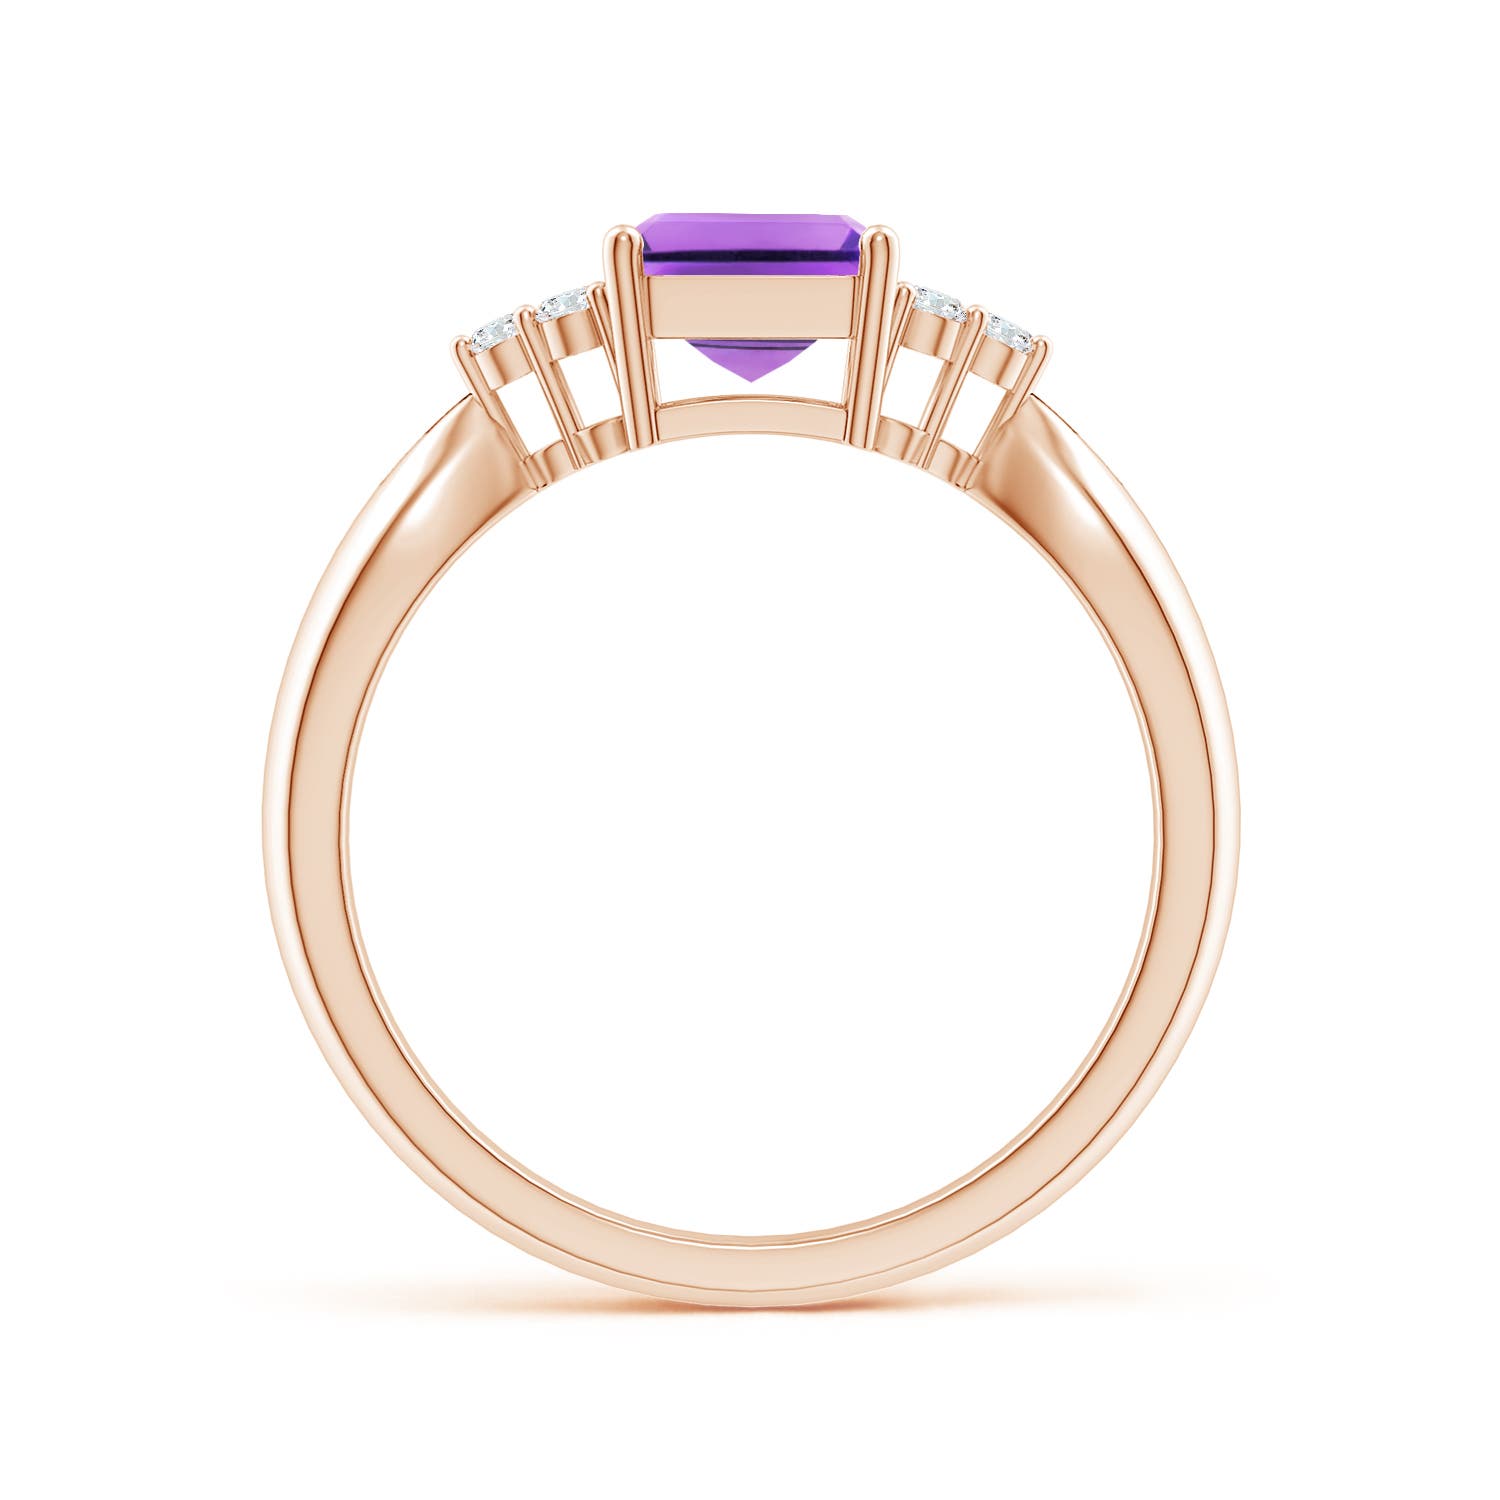 AA - Amethyst / 1.67 CT / 14 KT Rose Gold